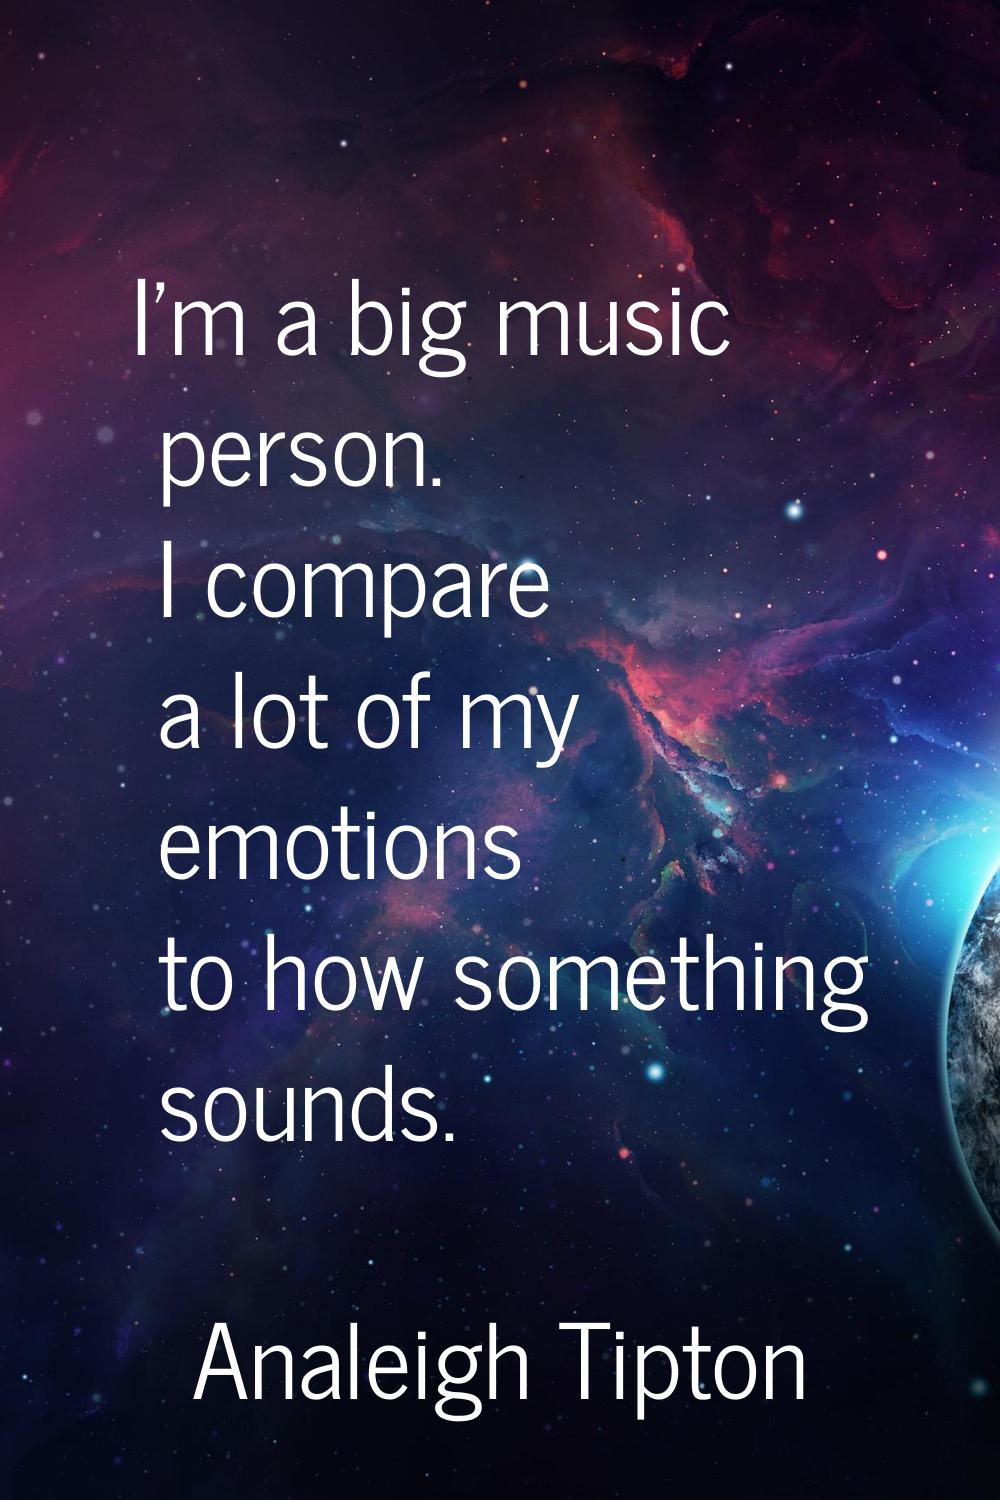 I'm a big music person. I compare a lot of my emotions to how something sounds.